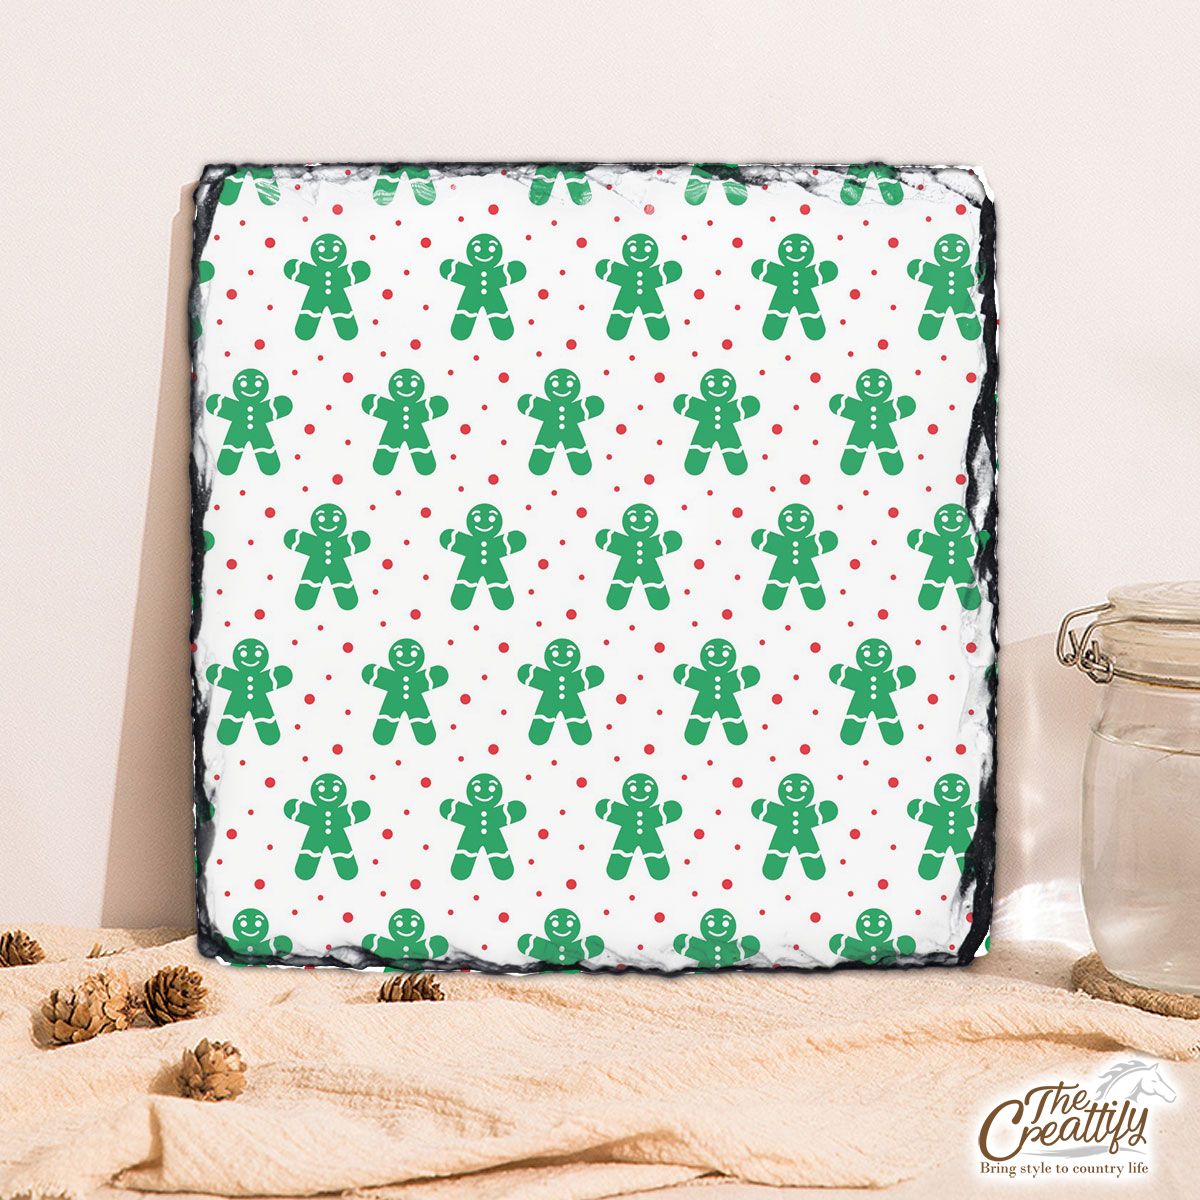 Gingerbread Man Cookies, Christmas Gingerbread Green With Snowflake Background White Square Lithograph